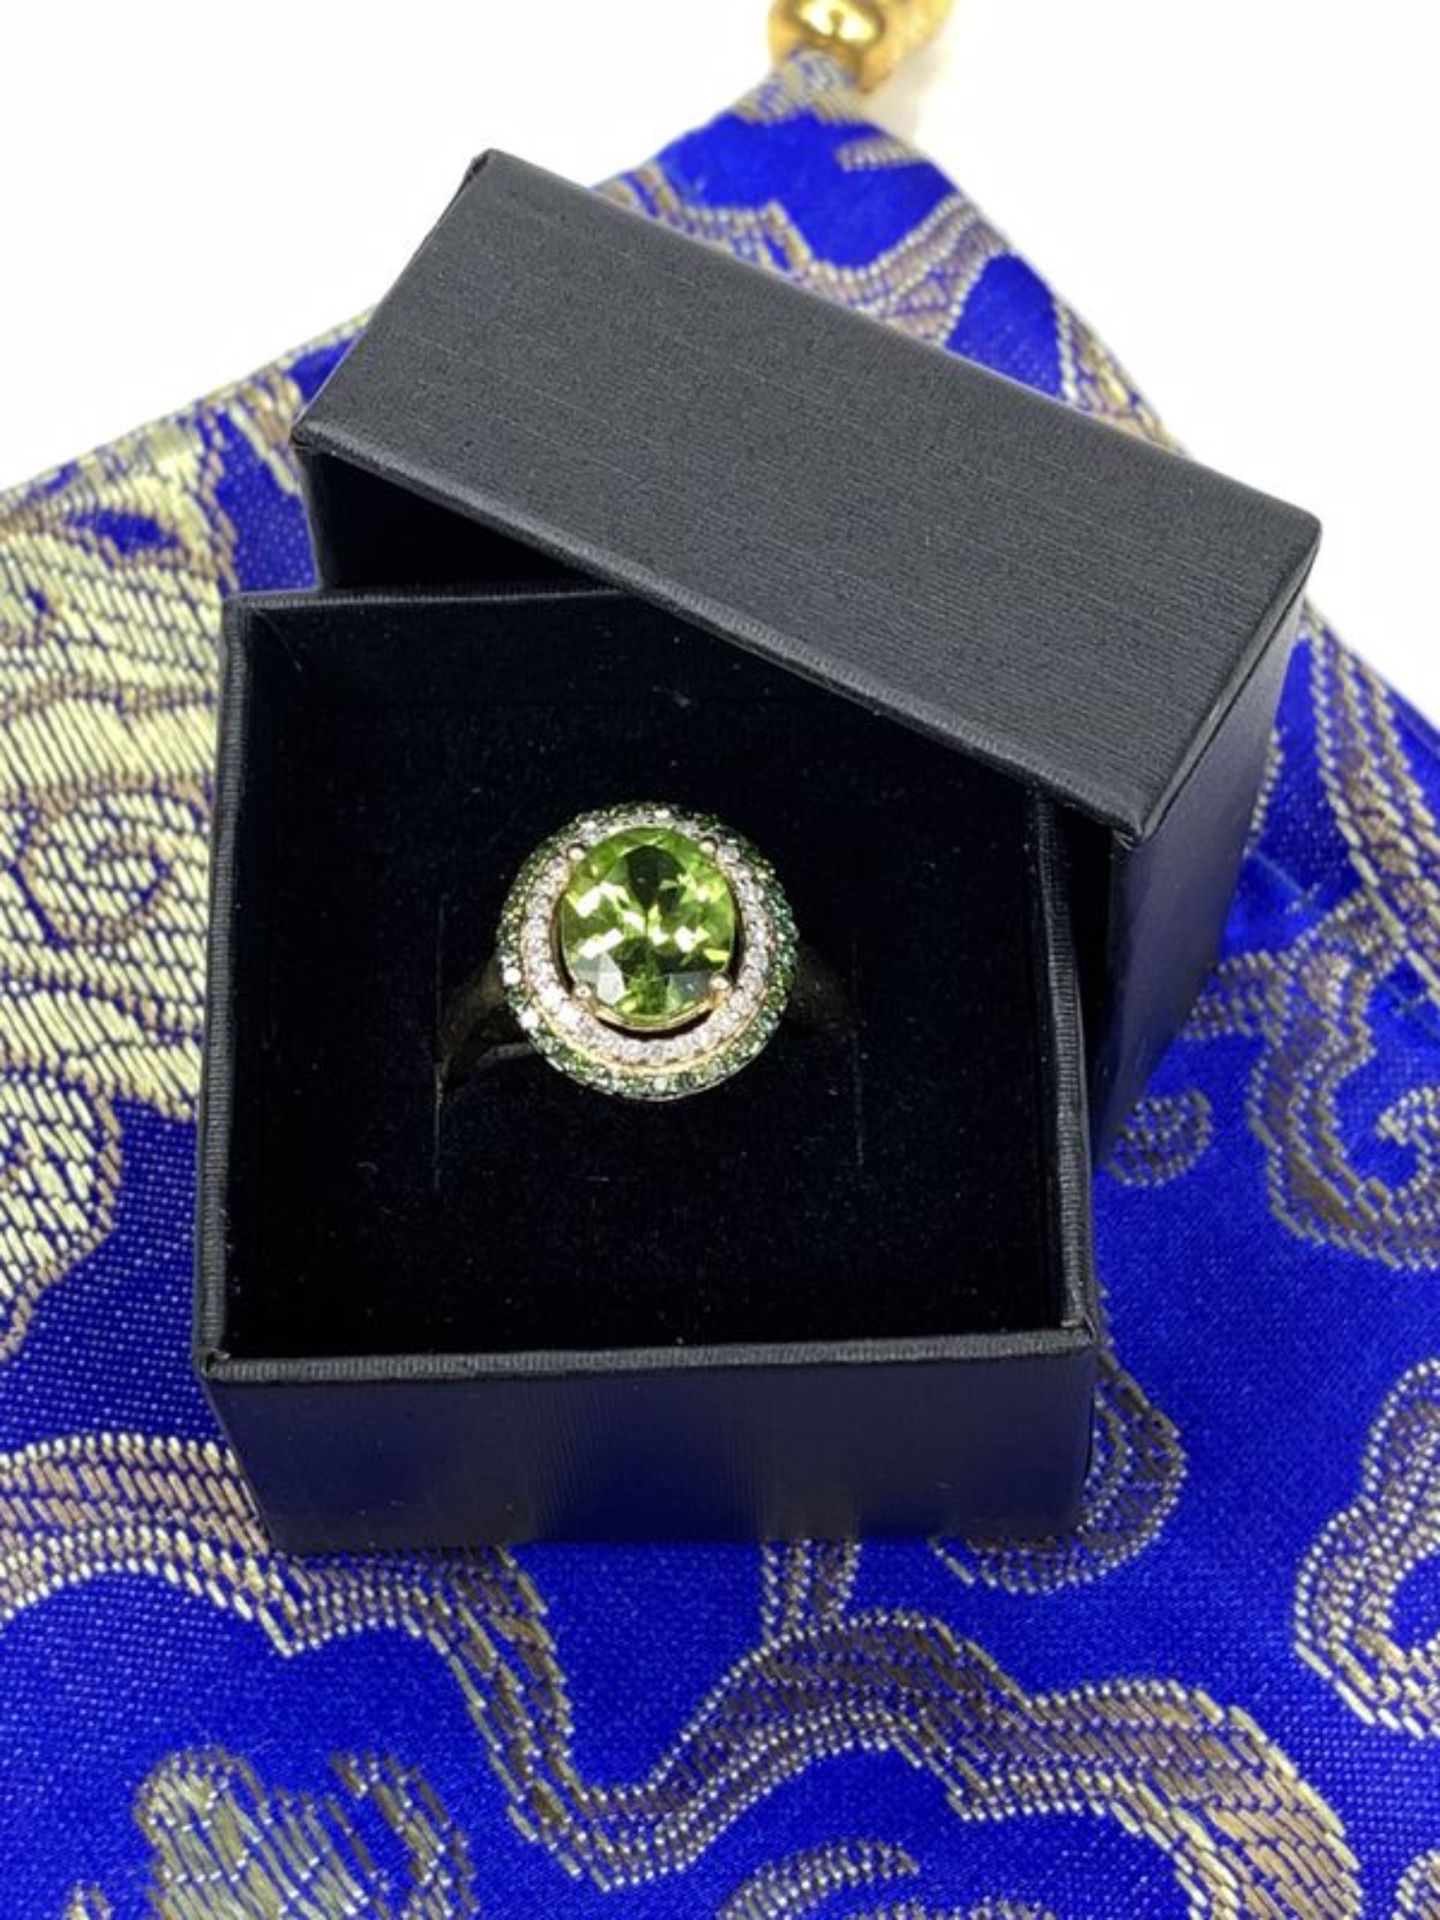 10k Gold Over 925 Sterling Silver Peridot Halo and White Zircon Ring (Sizable)